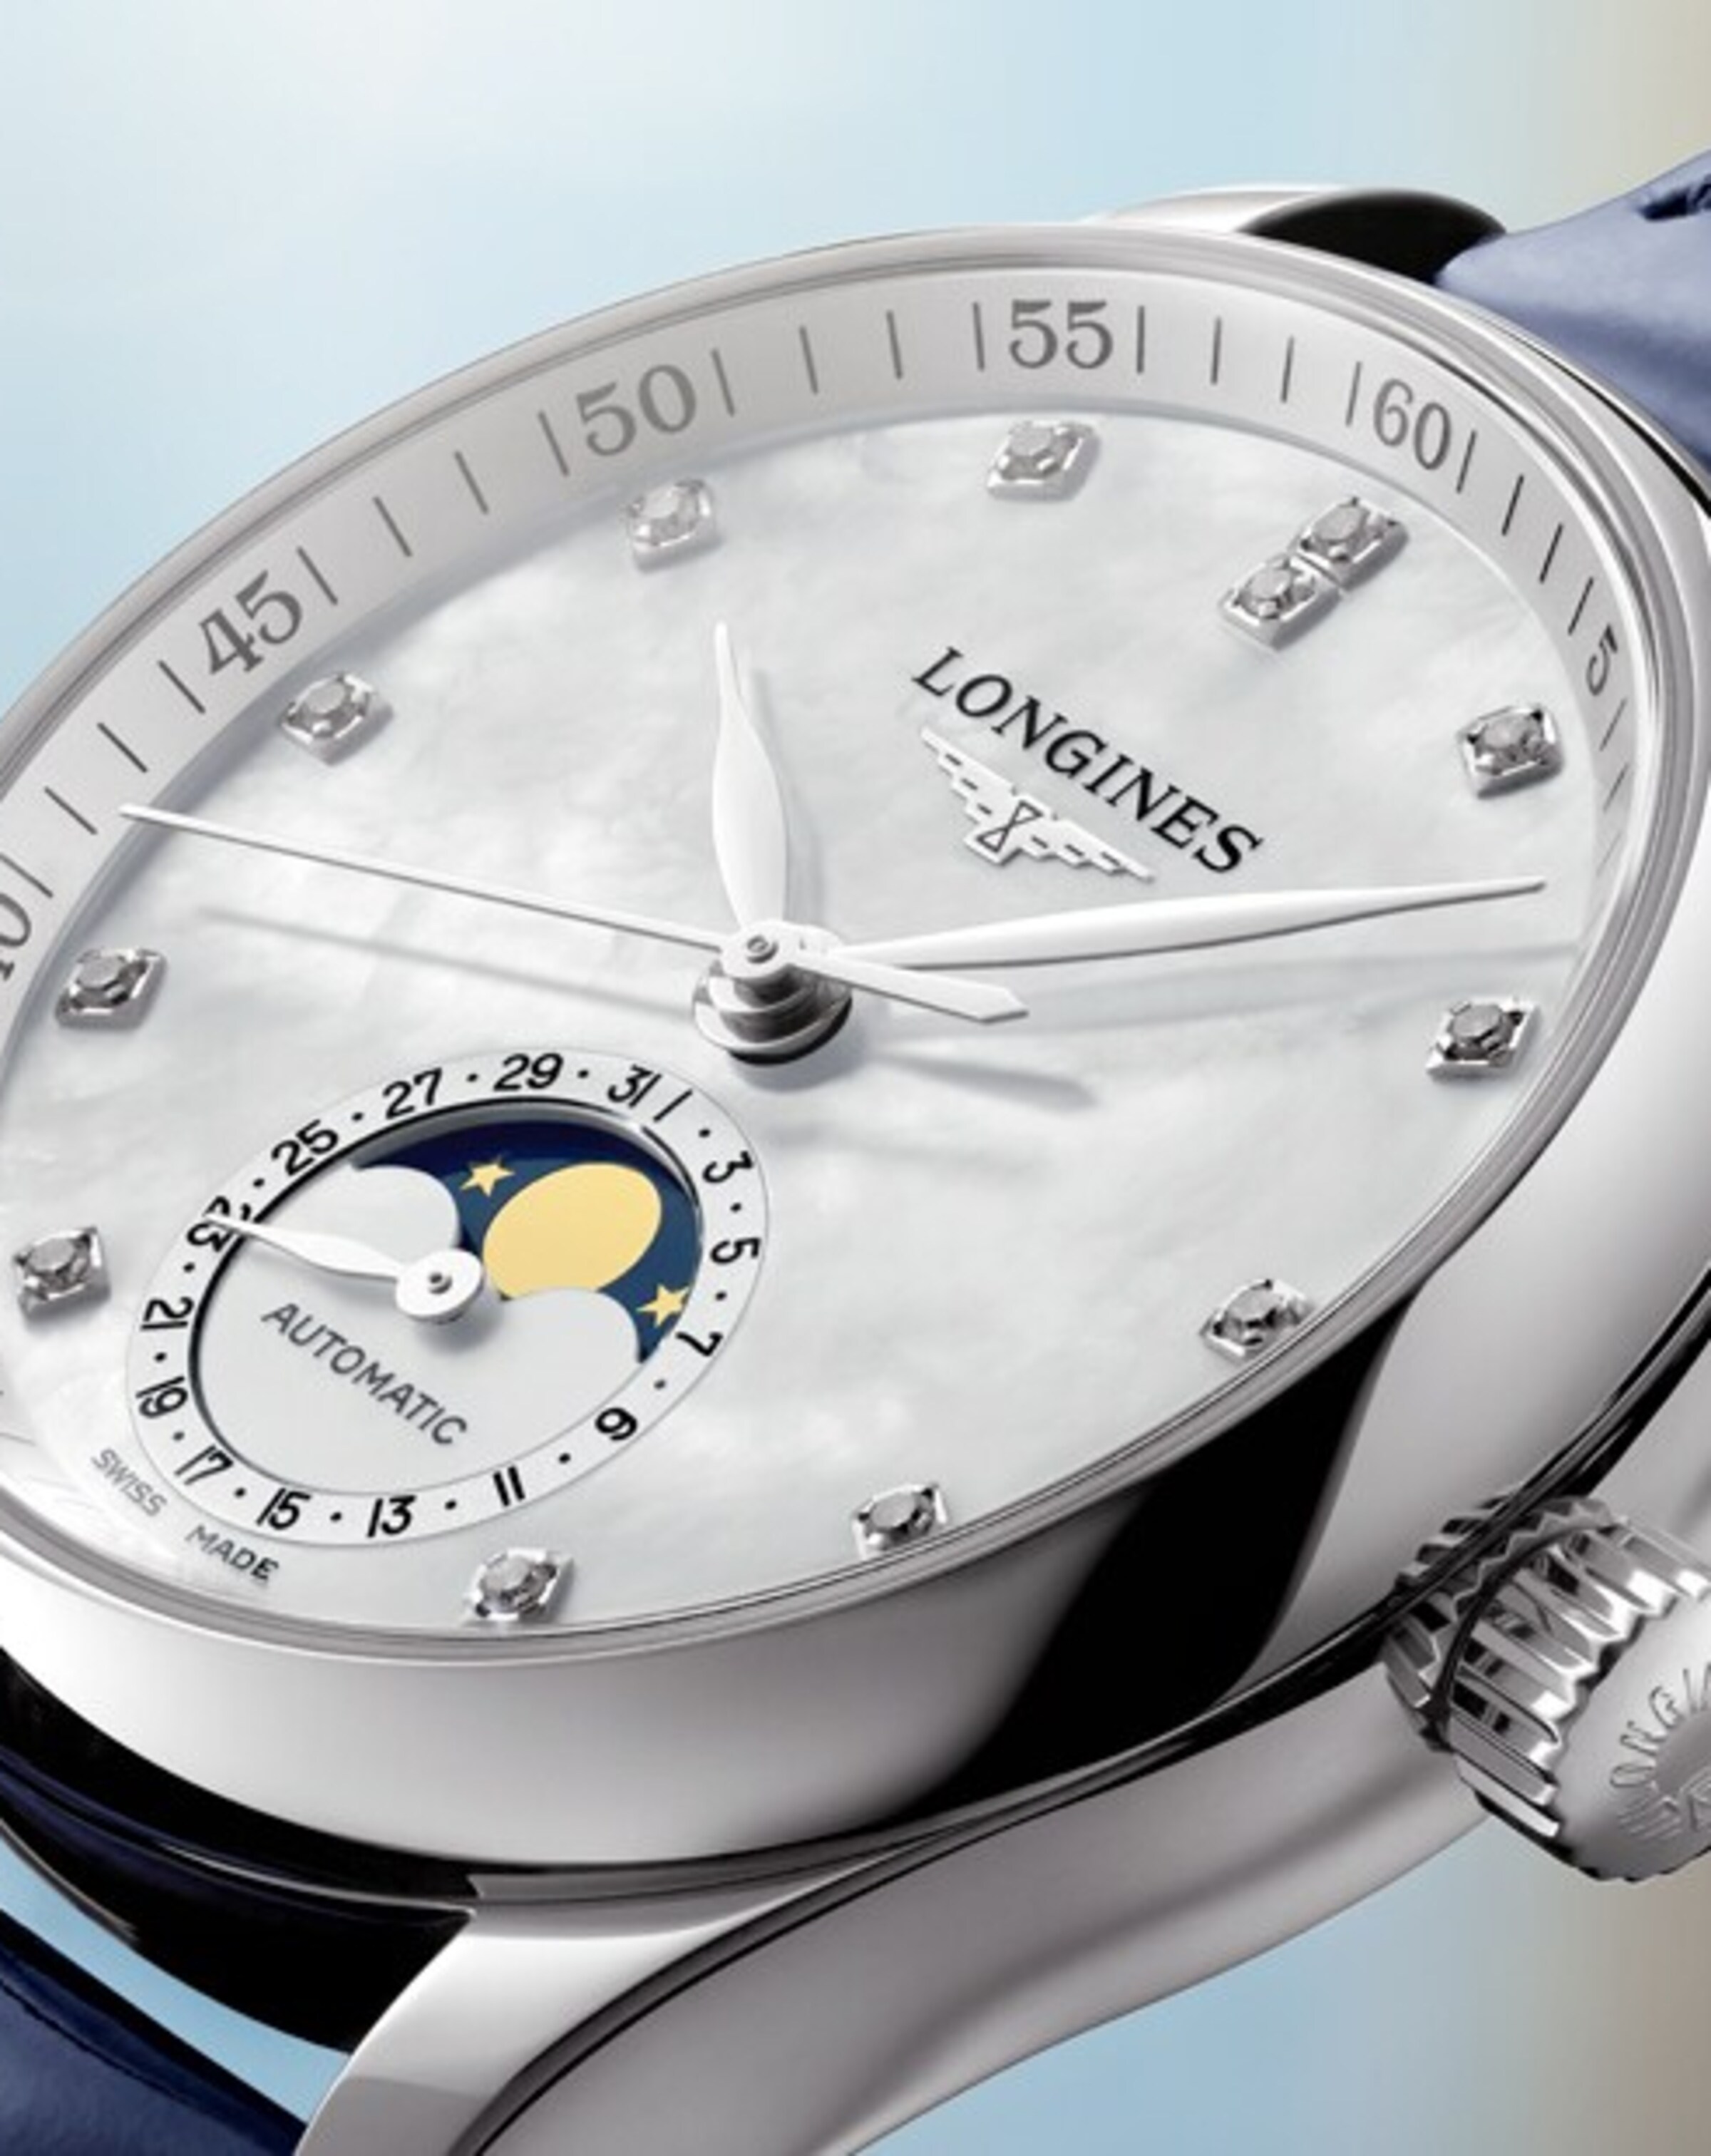 The Longines Master Collection Moonphase watch with blue strap